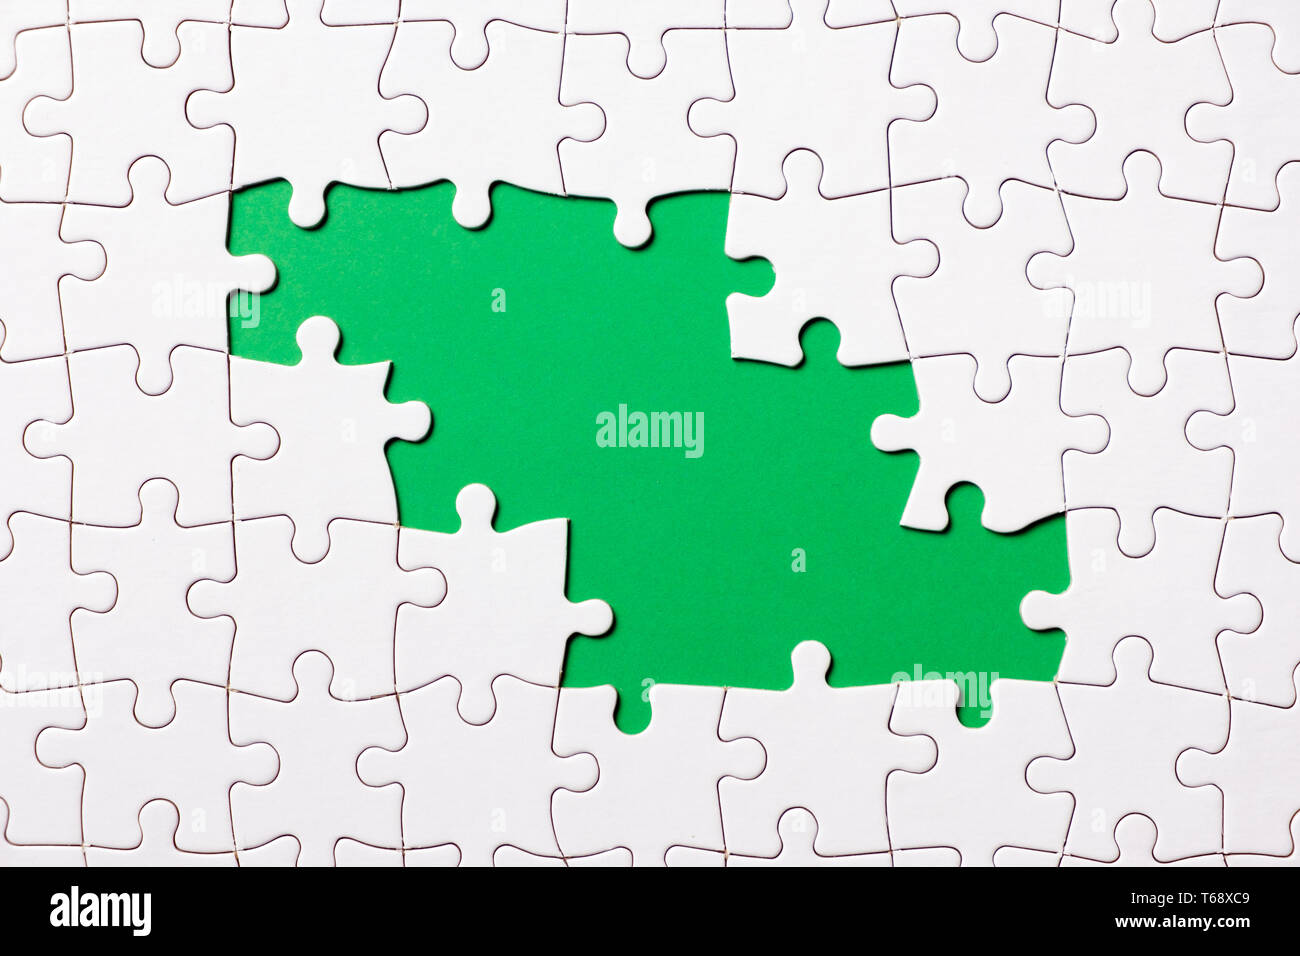 Jigsaw puzzle game piece on green background for business theme design Stock Photo